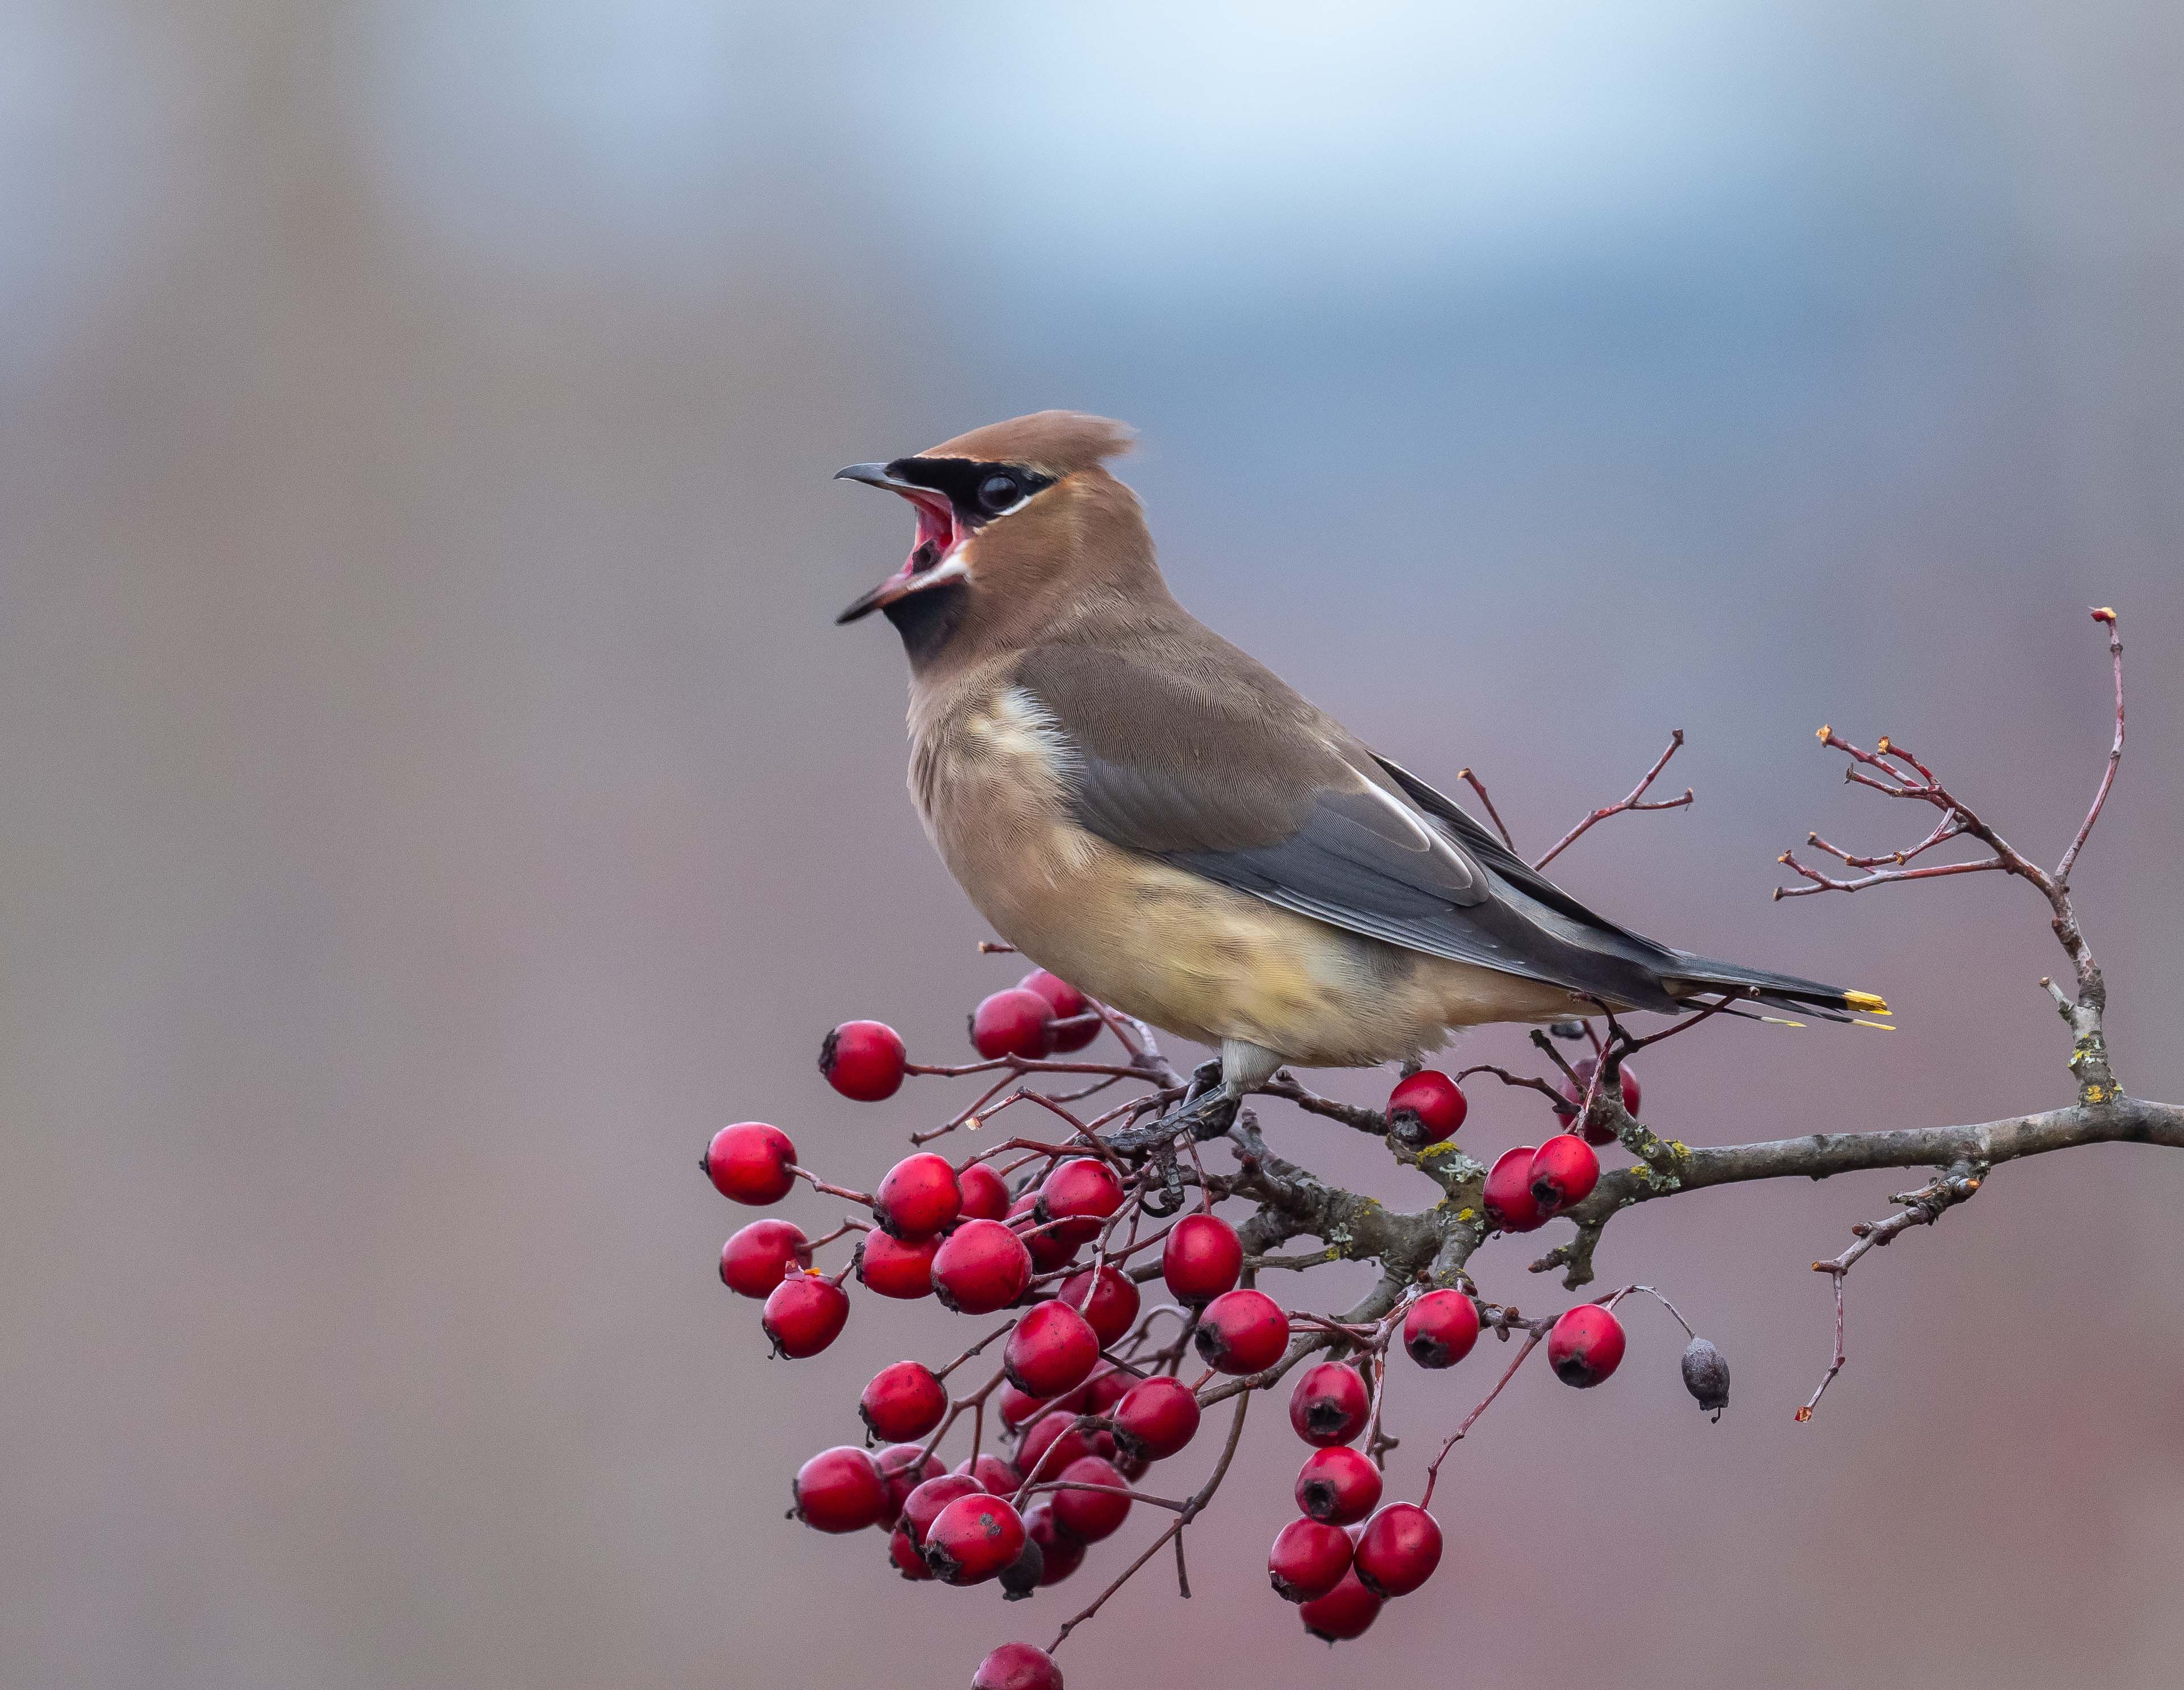 Cedar Waxwing perched on a branch eating berries